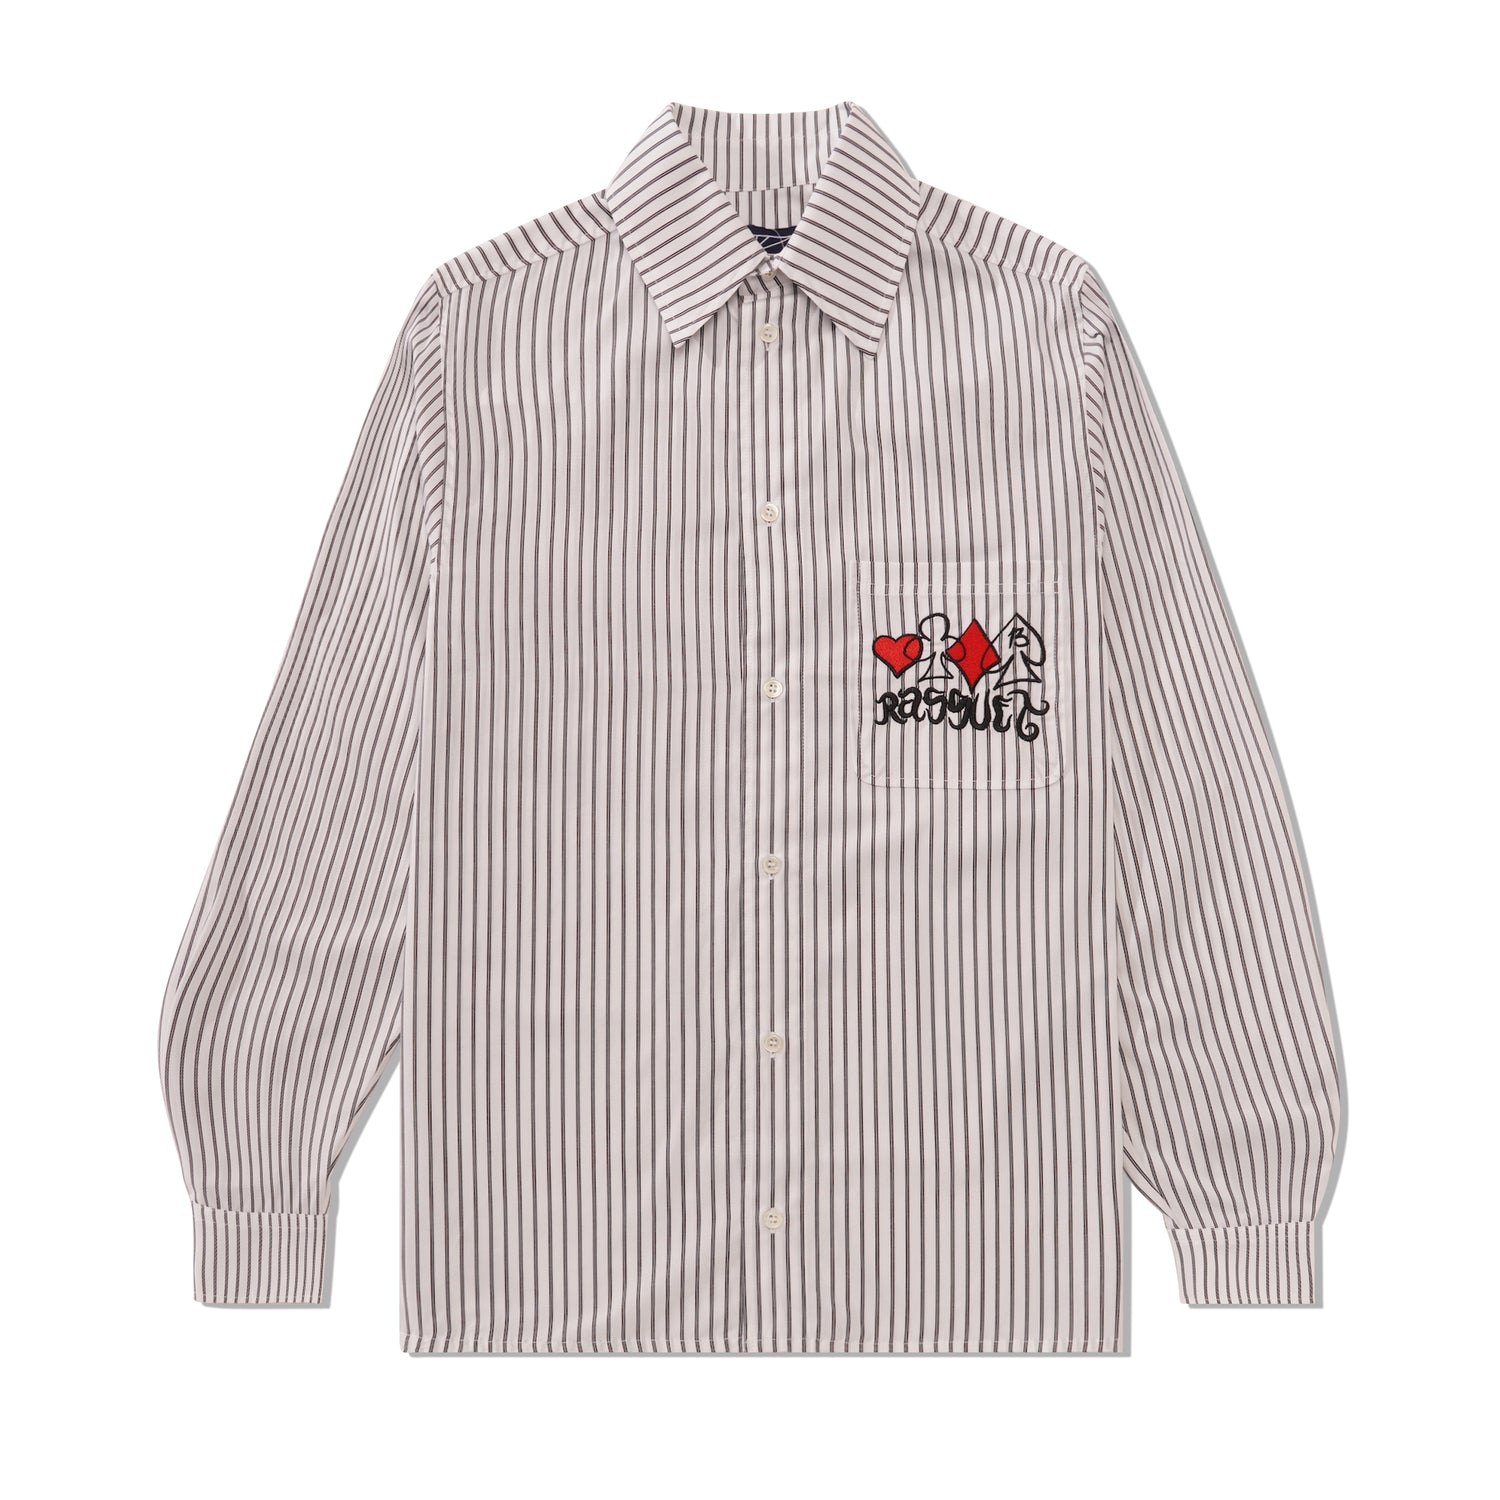 Card Suite Shirt, Striped